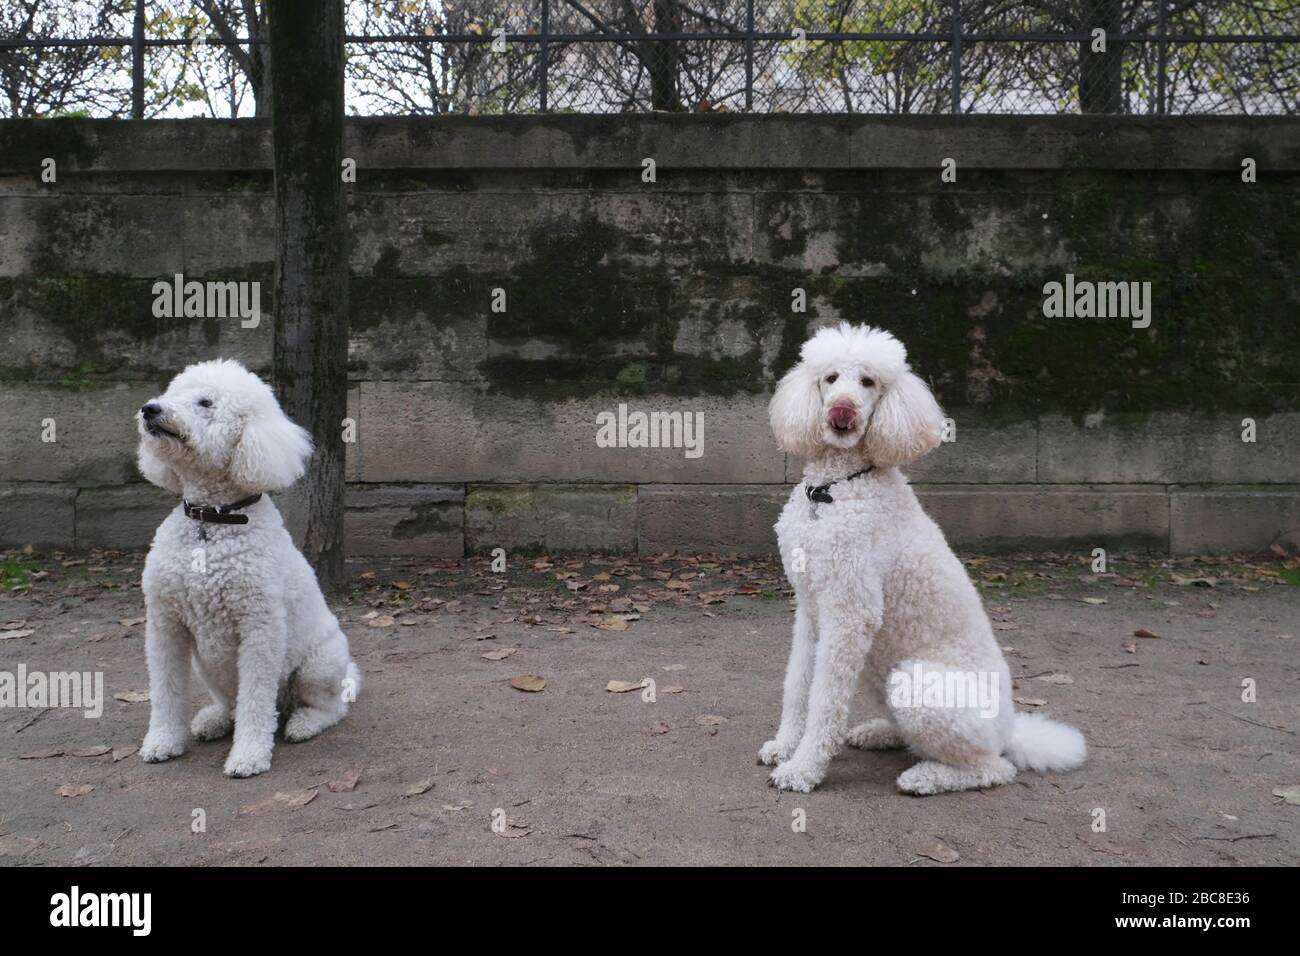 two dogs, white poodles Stock Photo